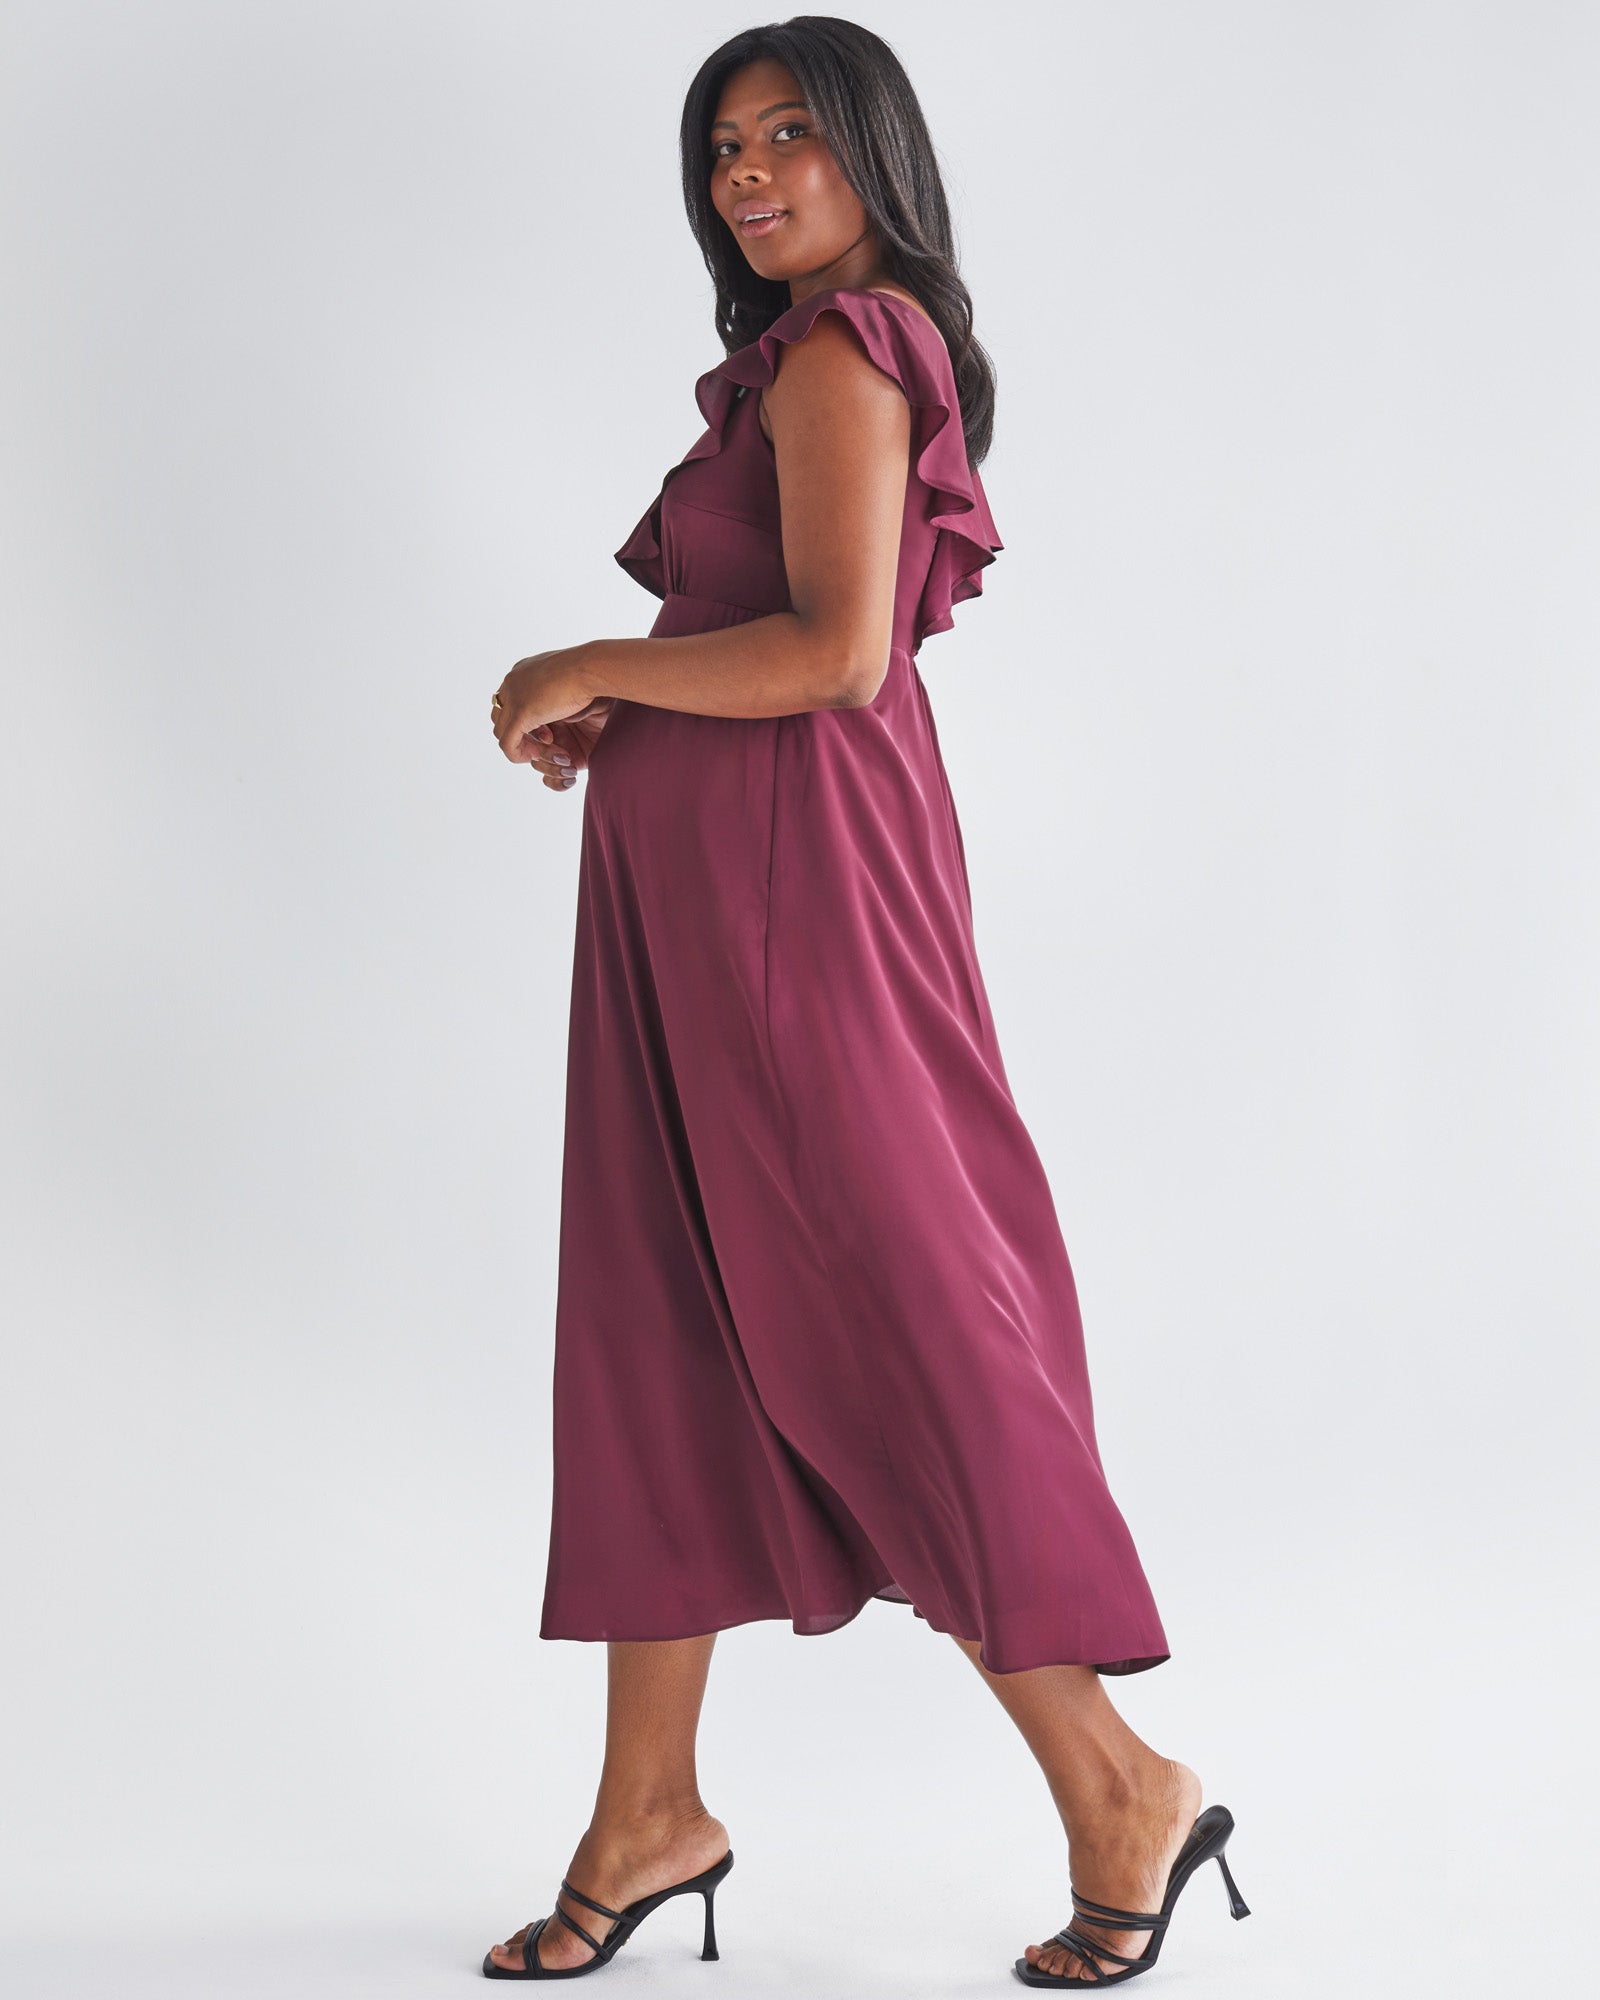 Main View - A Pregnannt Woman Wearing Mika Maternity Evening Ruffle Dress in Wine from Angel Maternity.